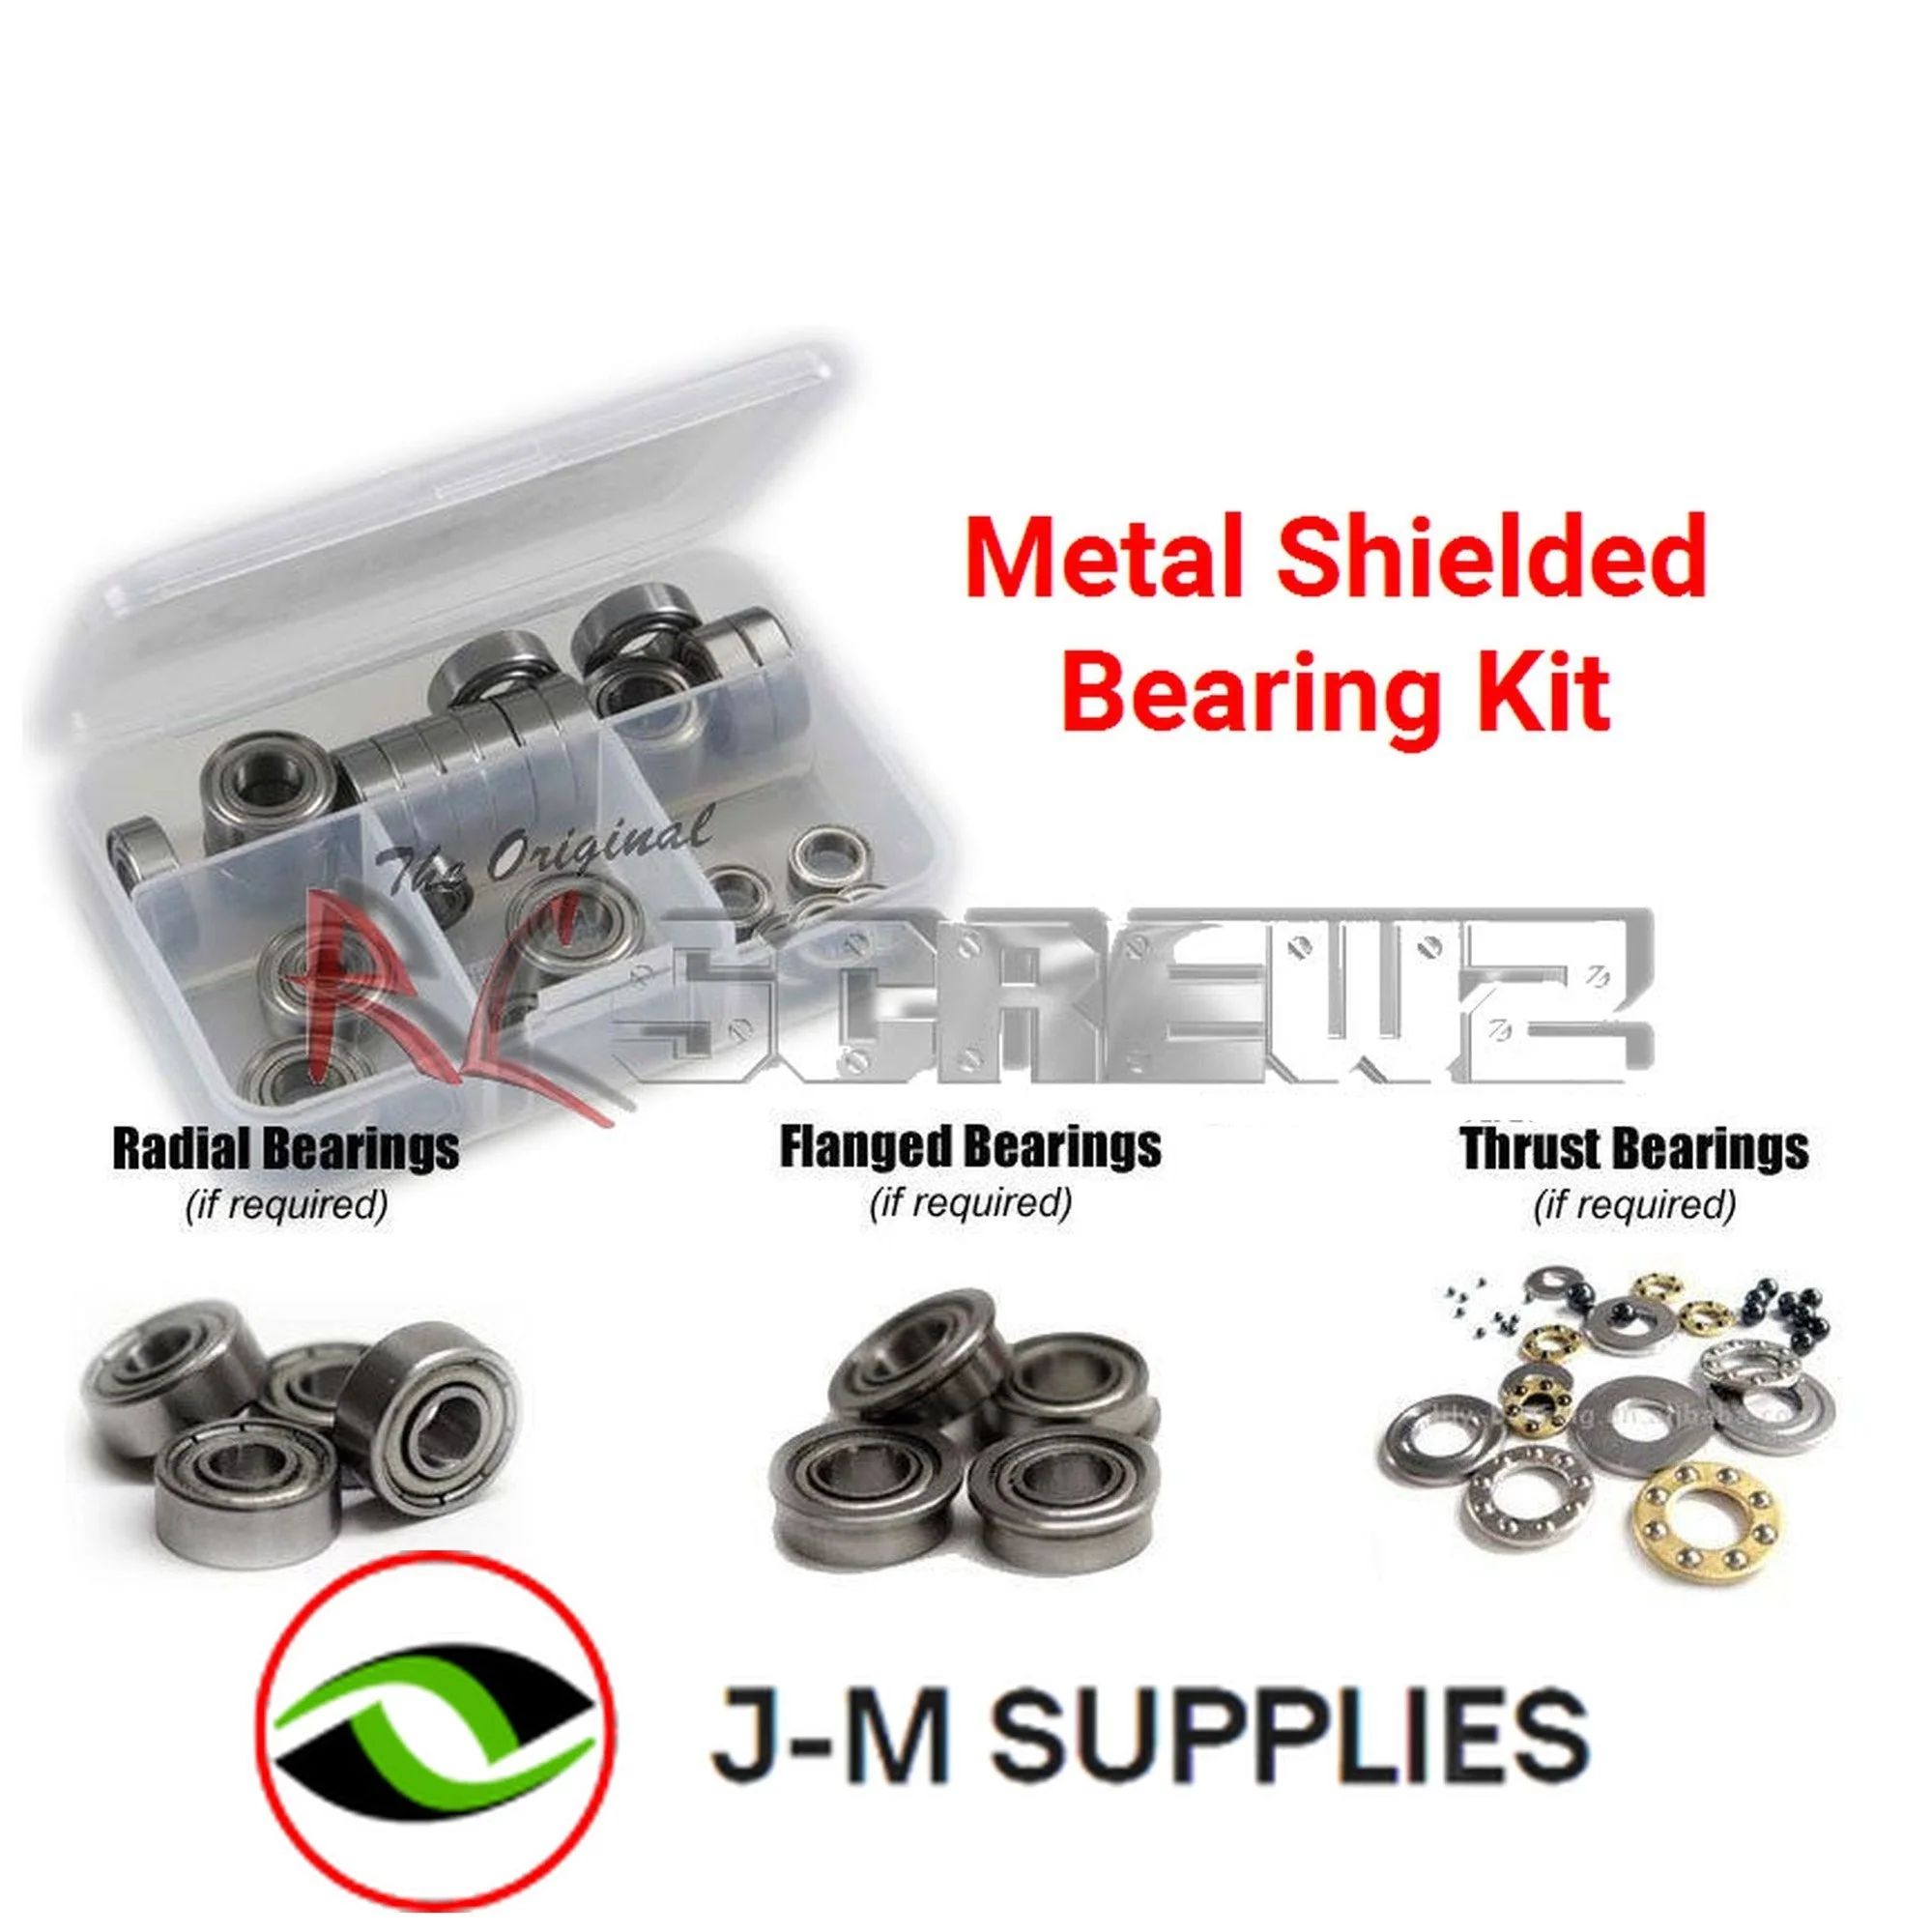 RCScrewZ Metal Shielded Bearing Kit ass023b for Associated RC18MT - Picture 1 of 12